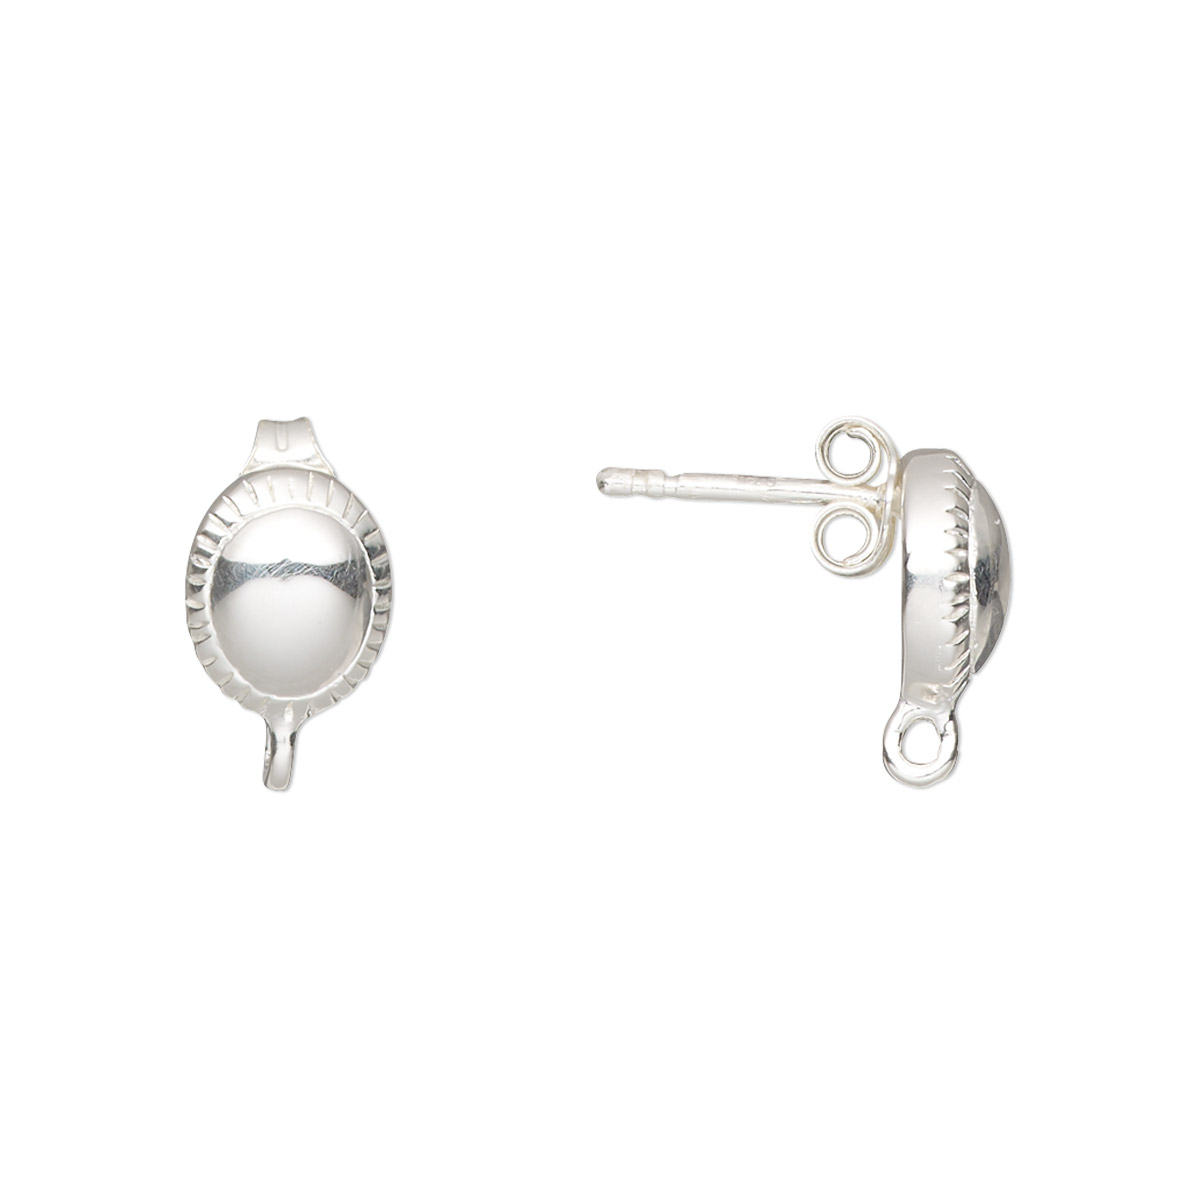 Earstud, sterling silver, 10x8mm oval with corrugated rim and closed ...